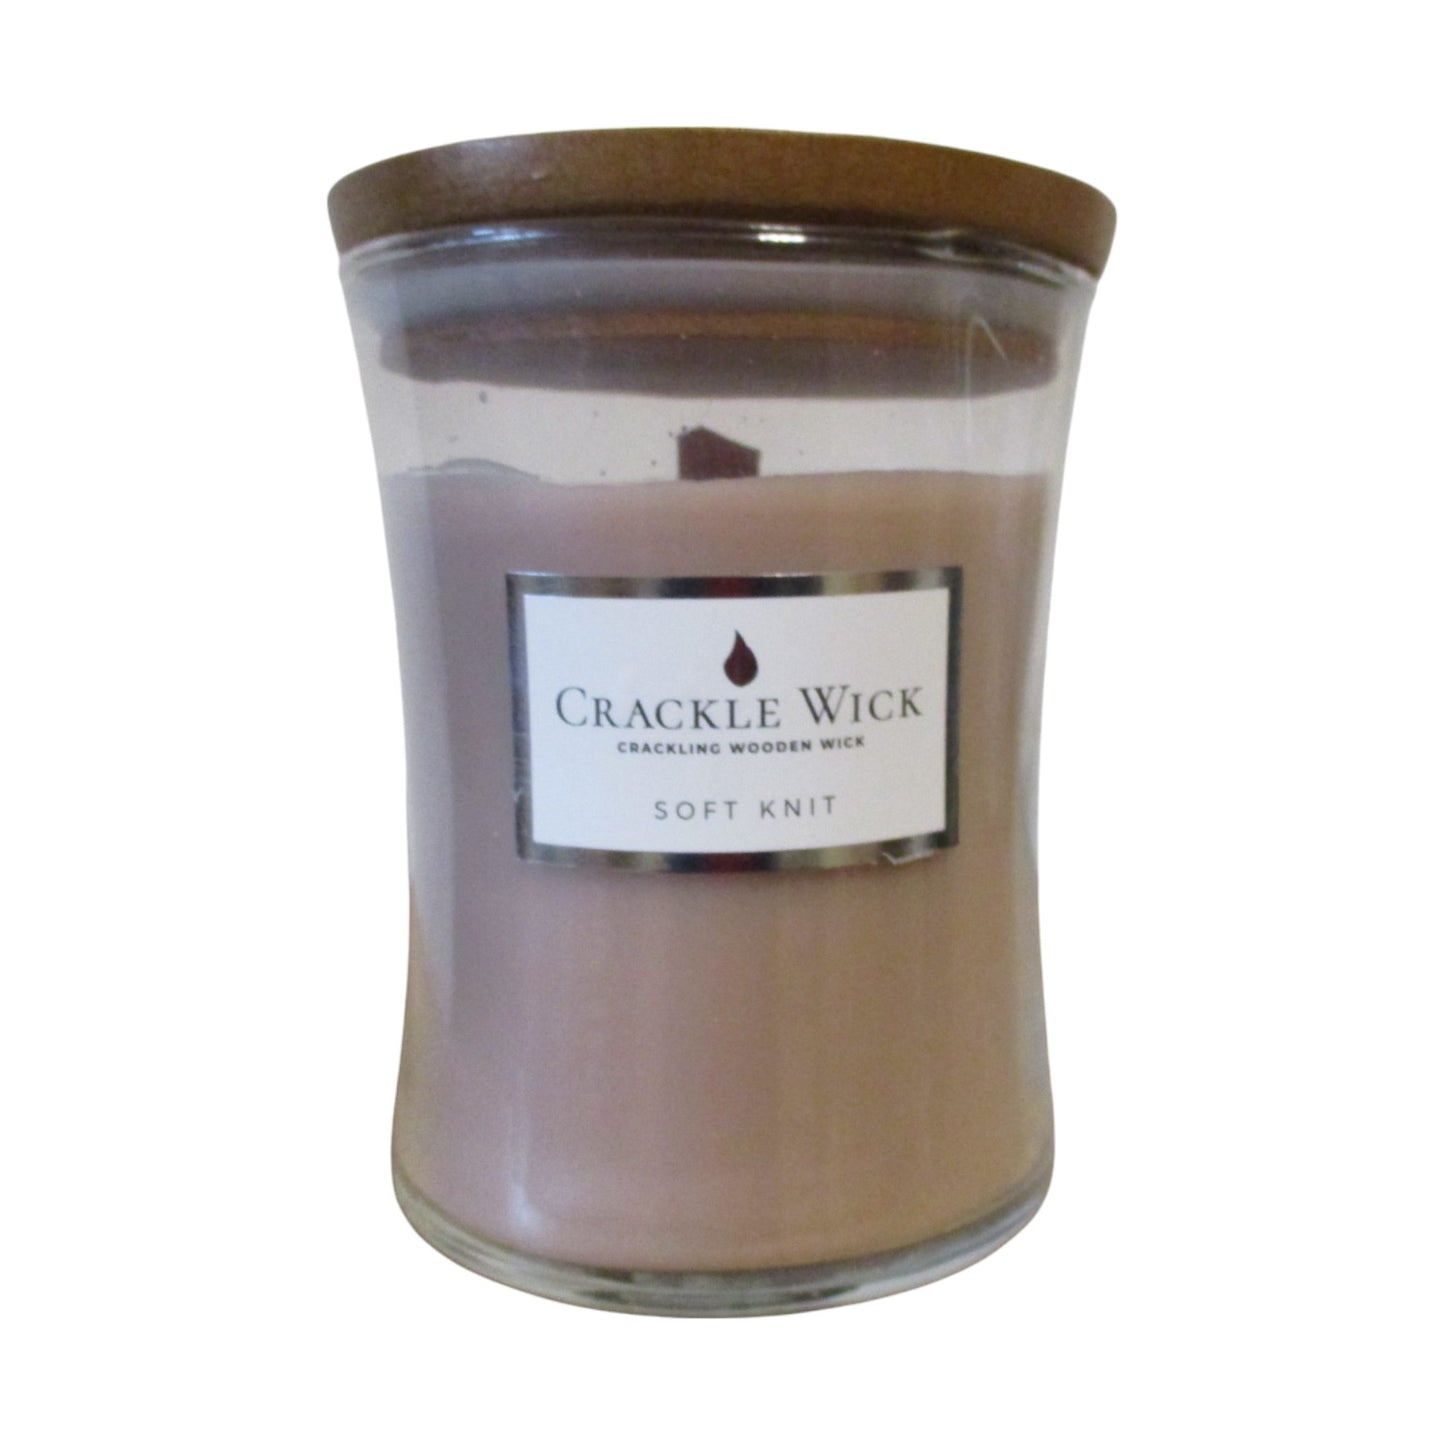 Crackle Wick - Soft Knit - Single Wick Candle Medium Hourglass 310g